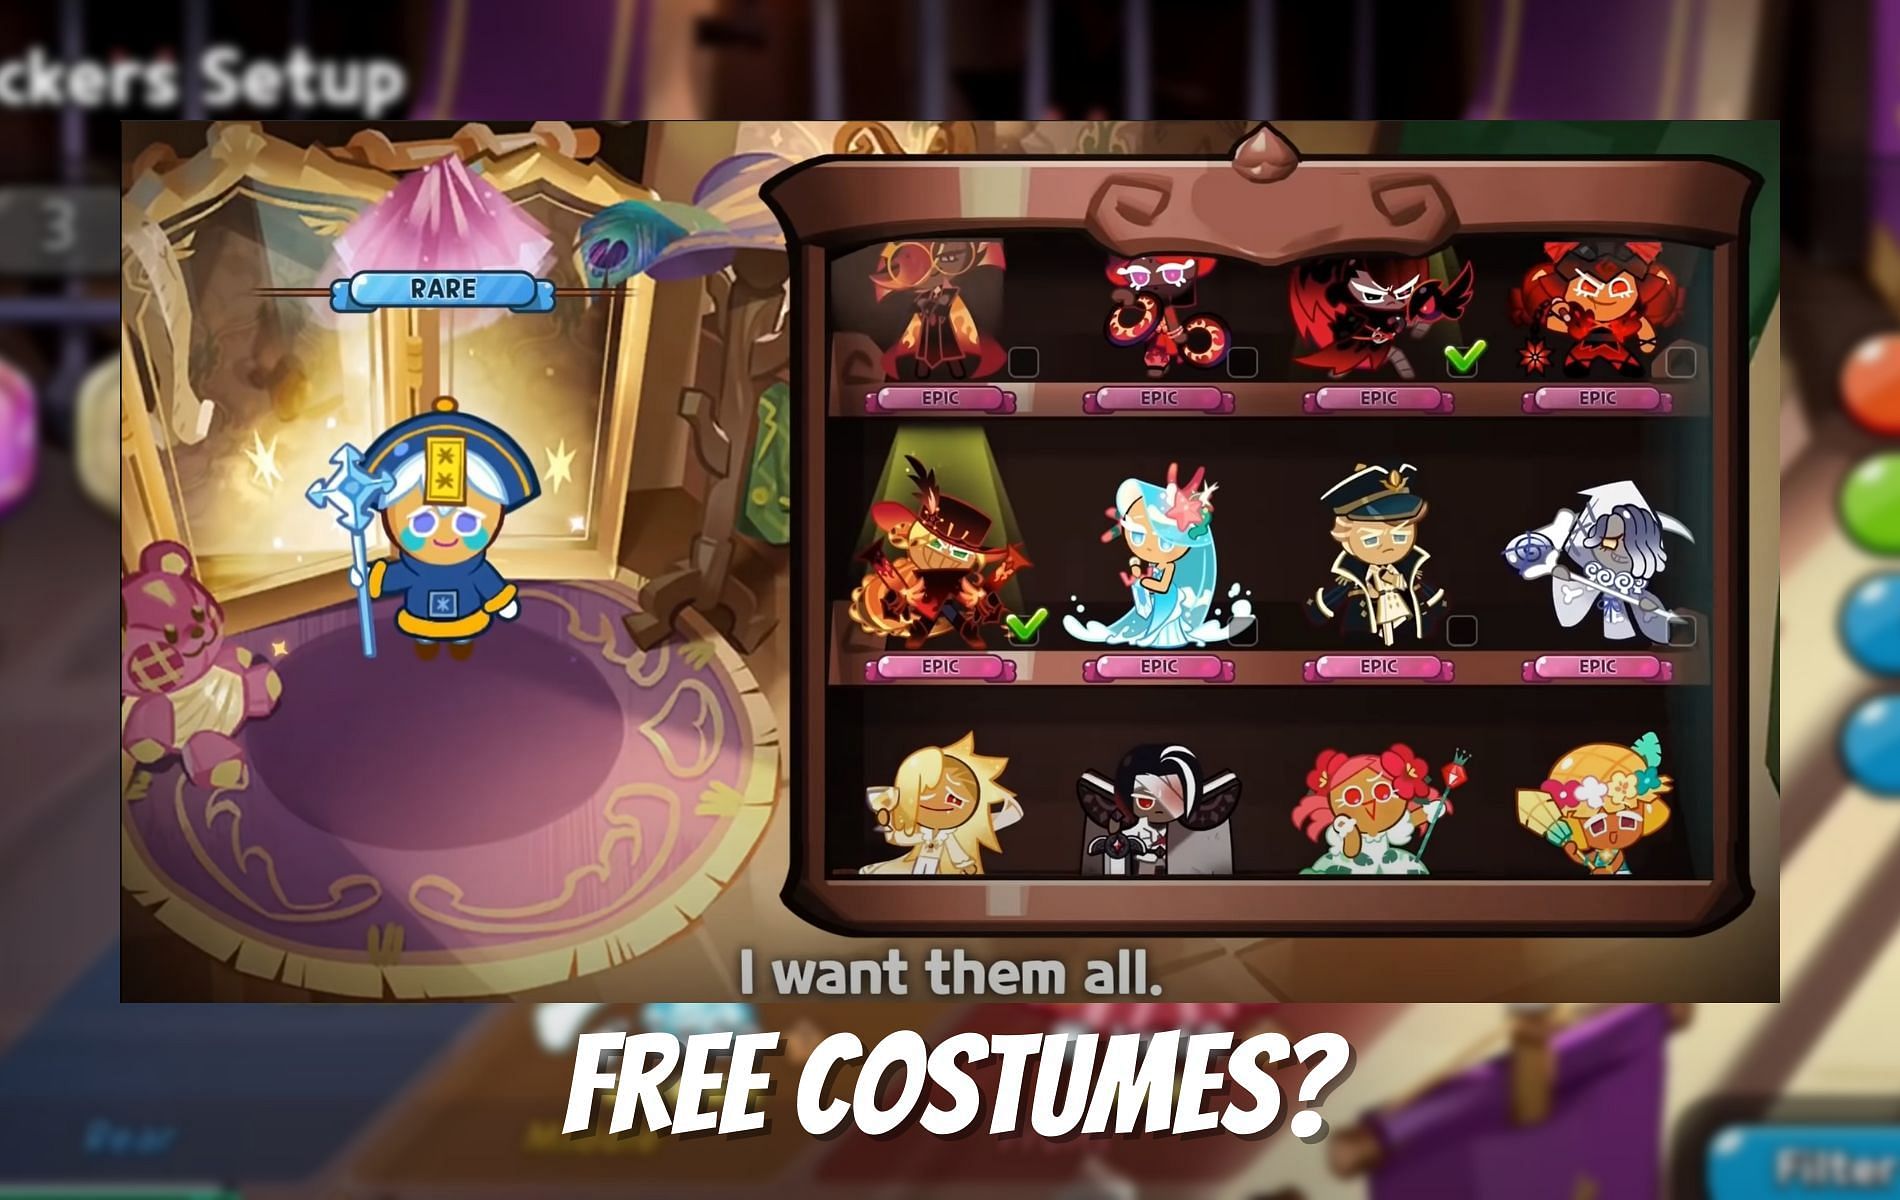 How to get costumes in Cookie Run Kingdom?